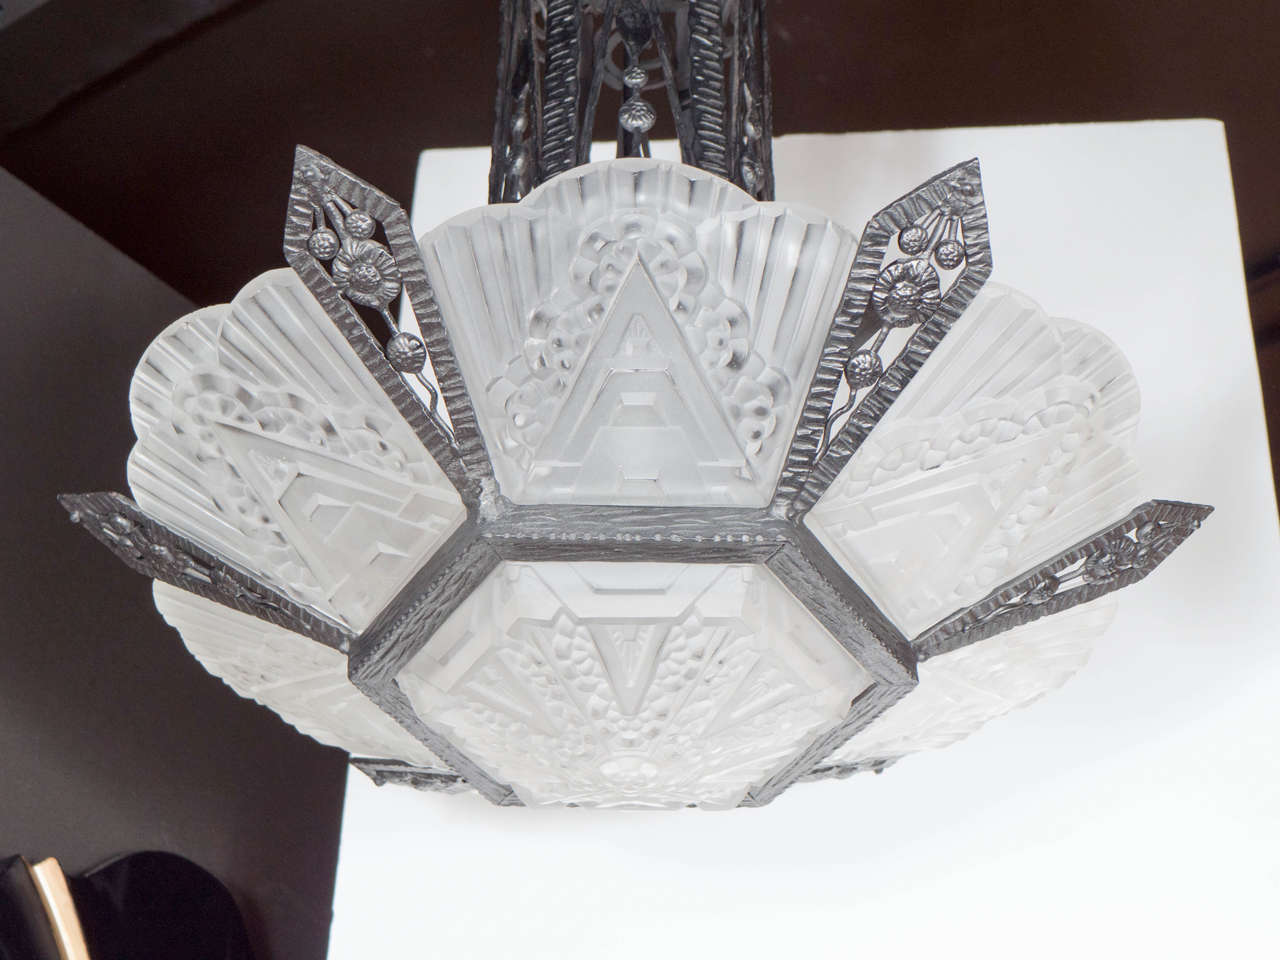 French Gorgeous Art Deco Chandelier by Verdun with Highly Stylized Art Deco Designs